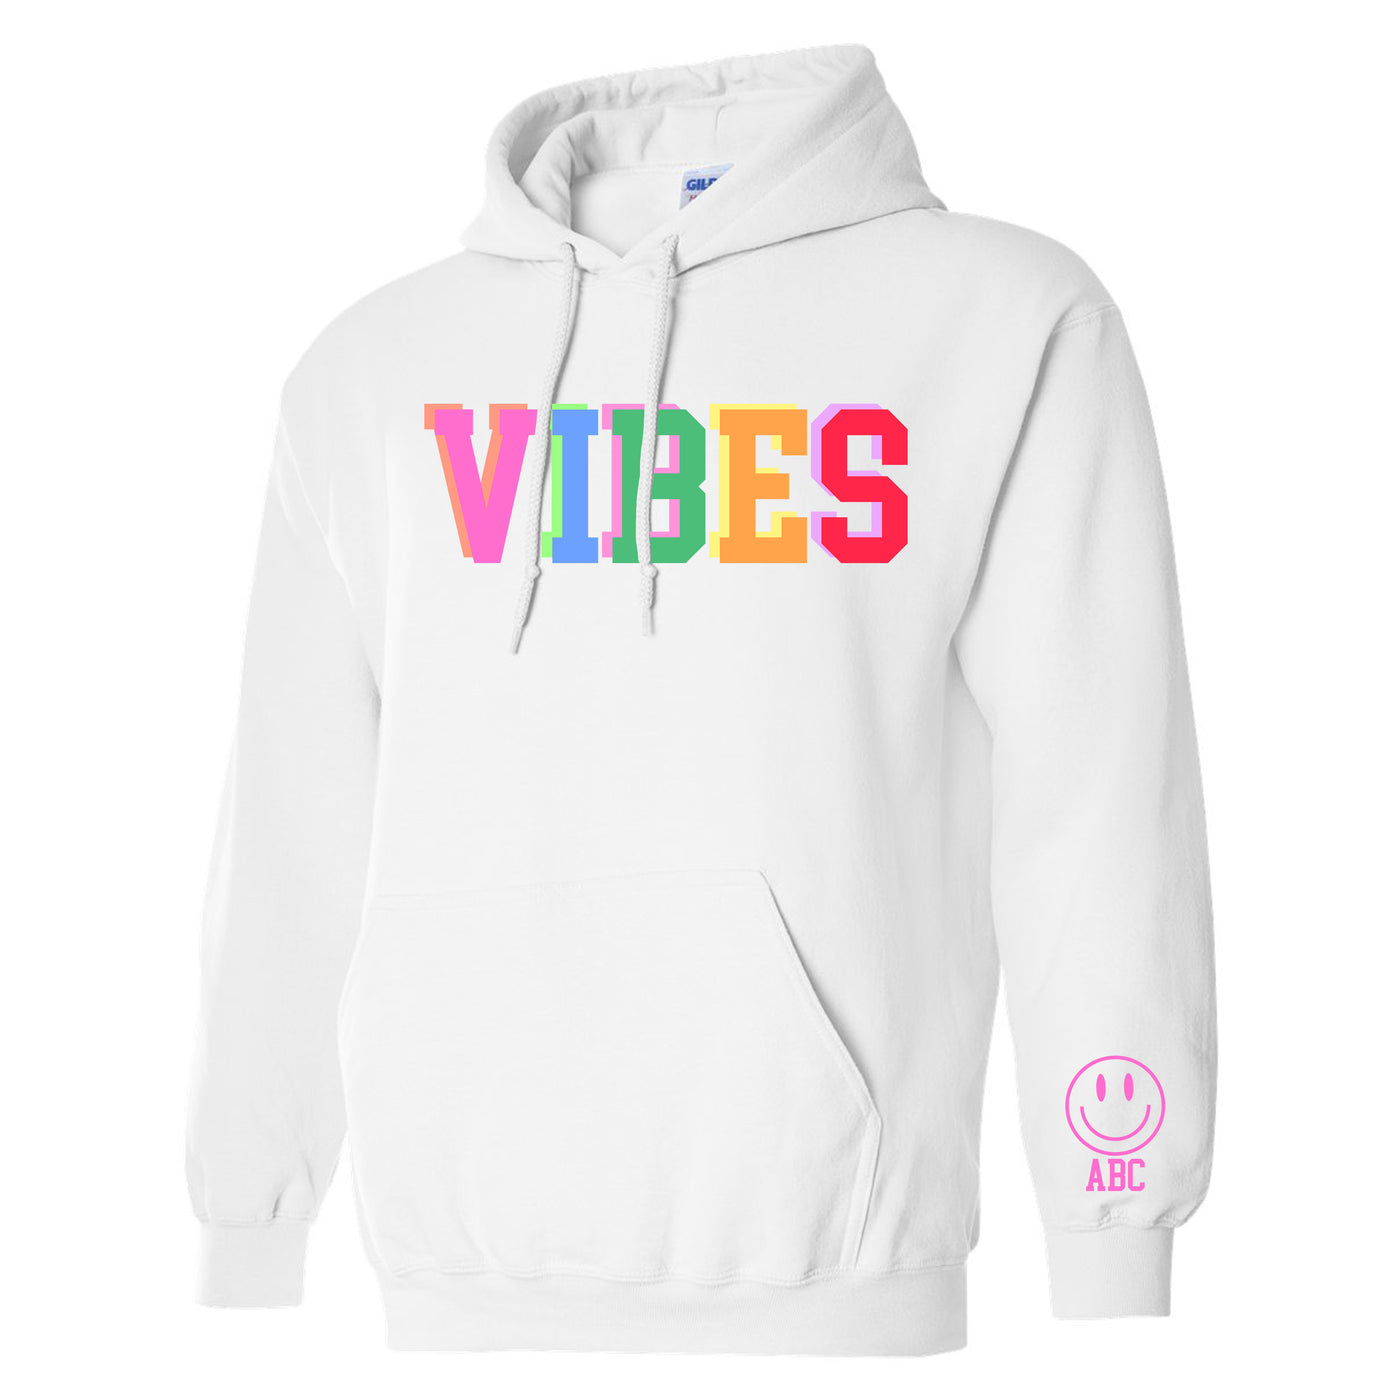 Initialed Colorful Block 'Vibes' Hoodie